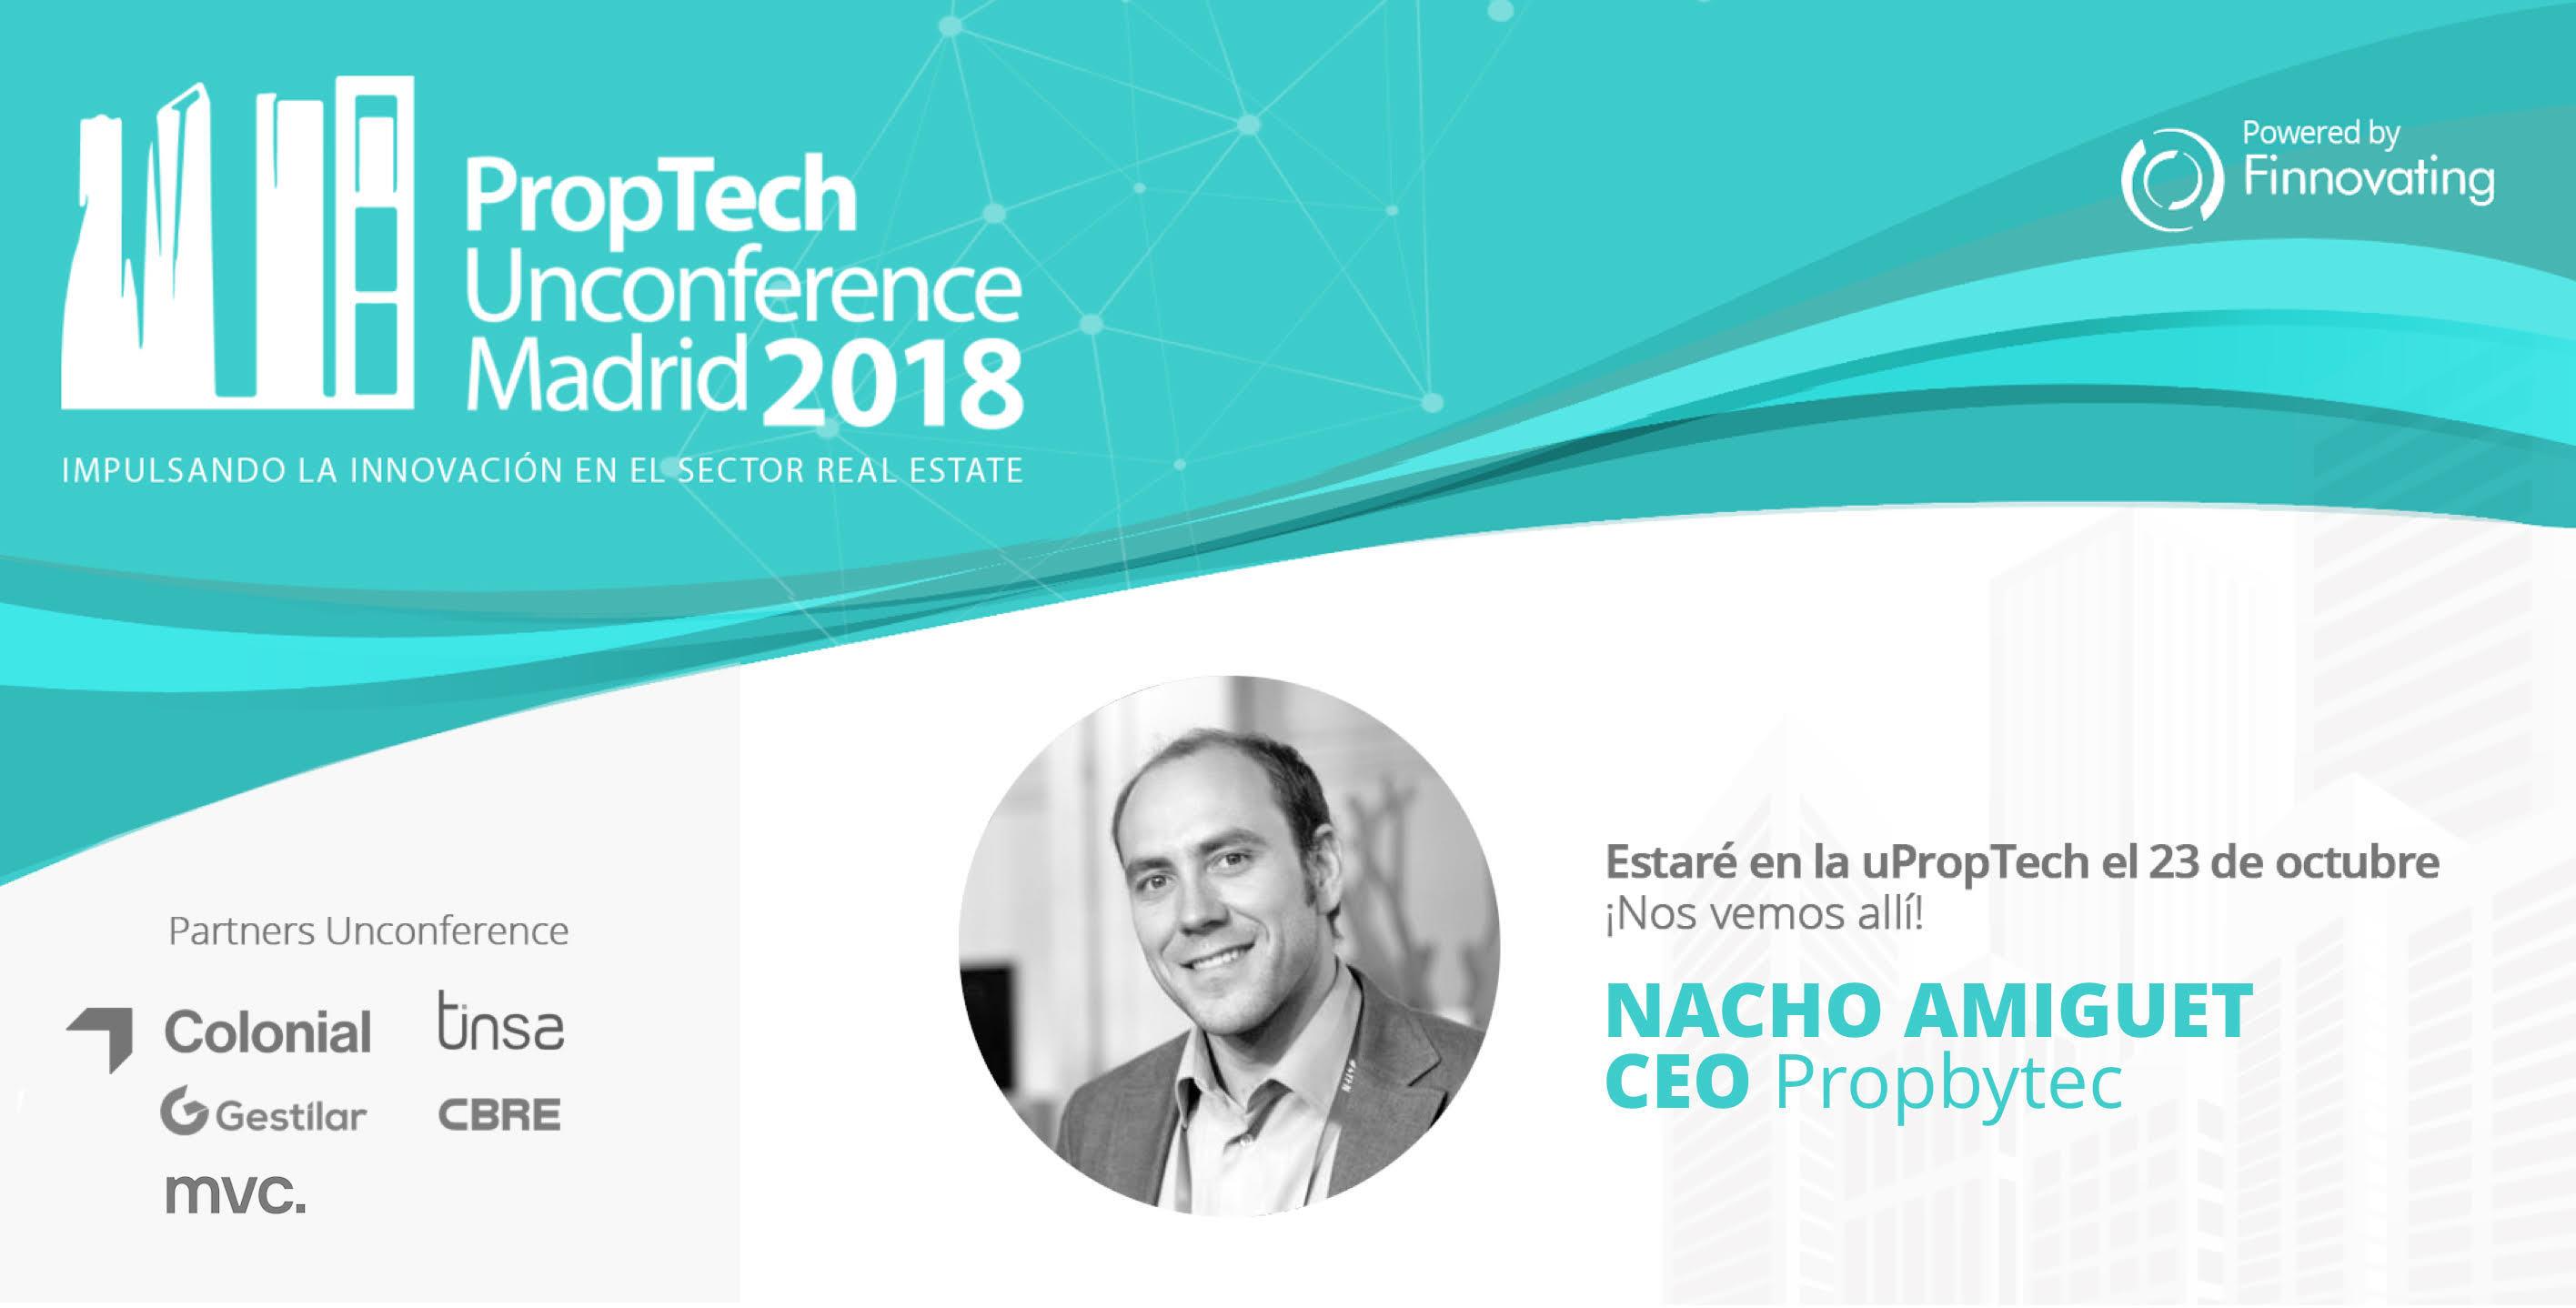 Proptech Unconference Madrid 2018